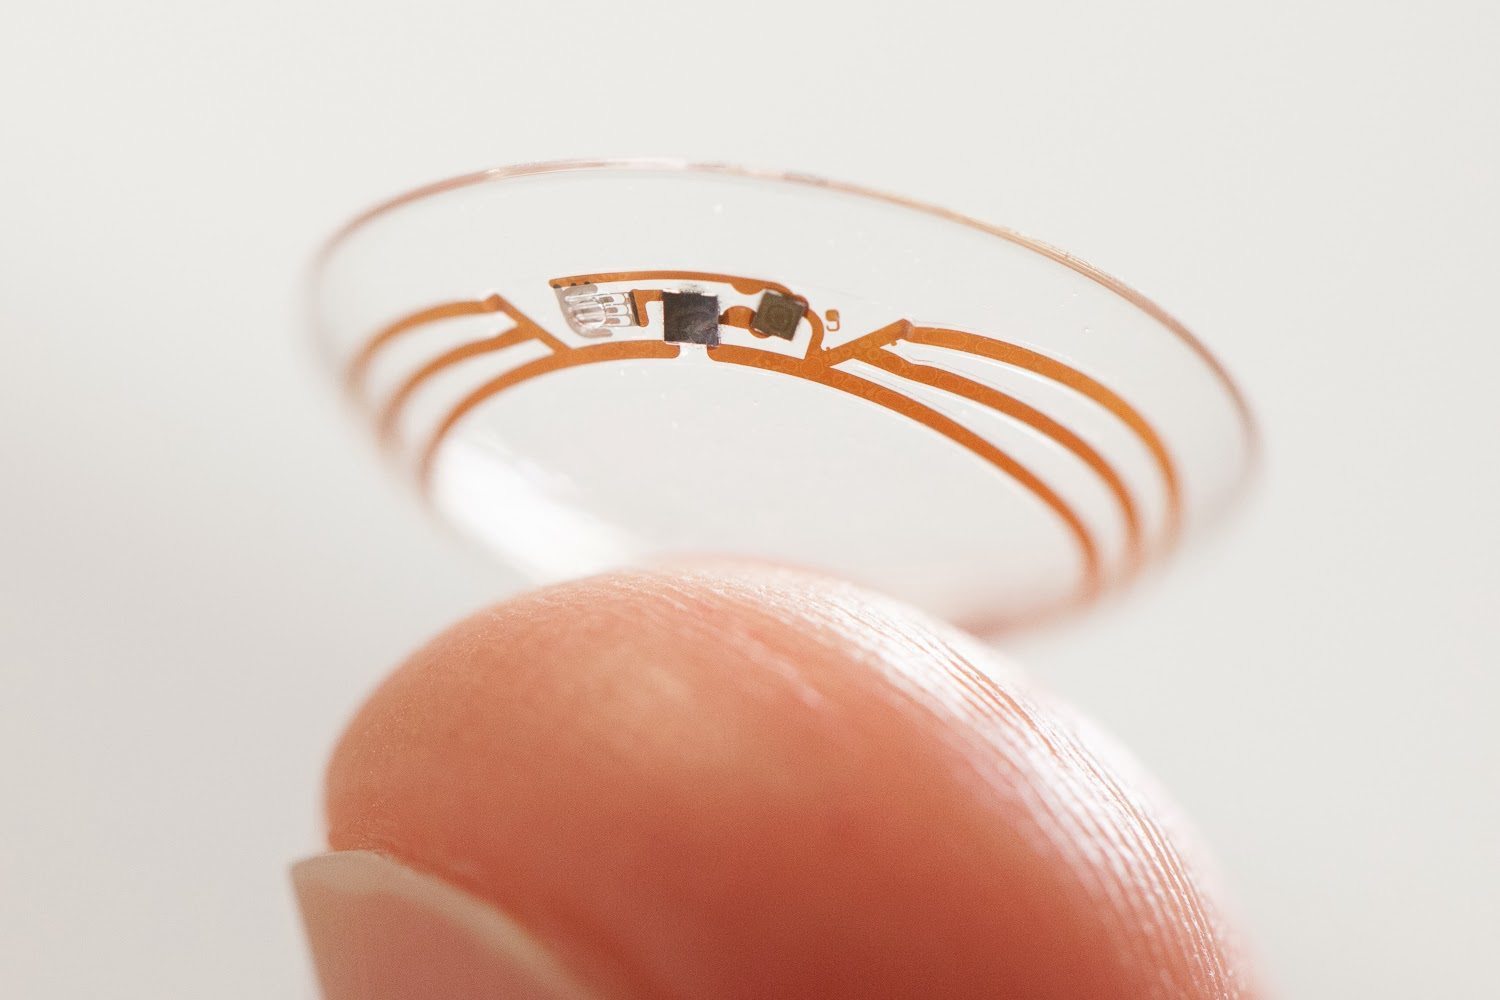 Google Working on Smart Contact Lens